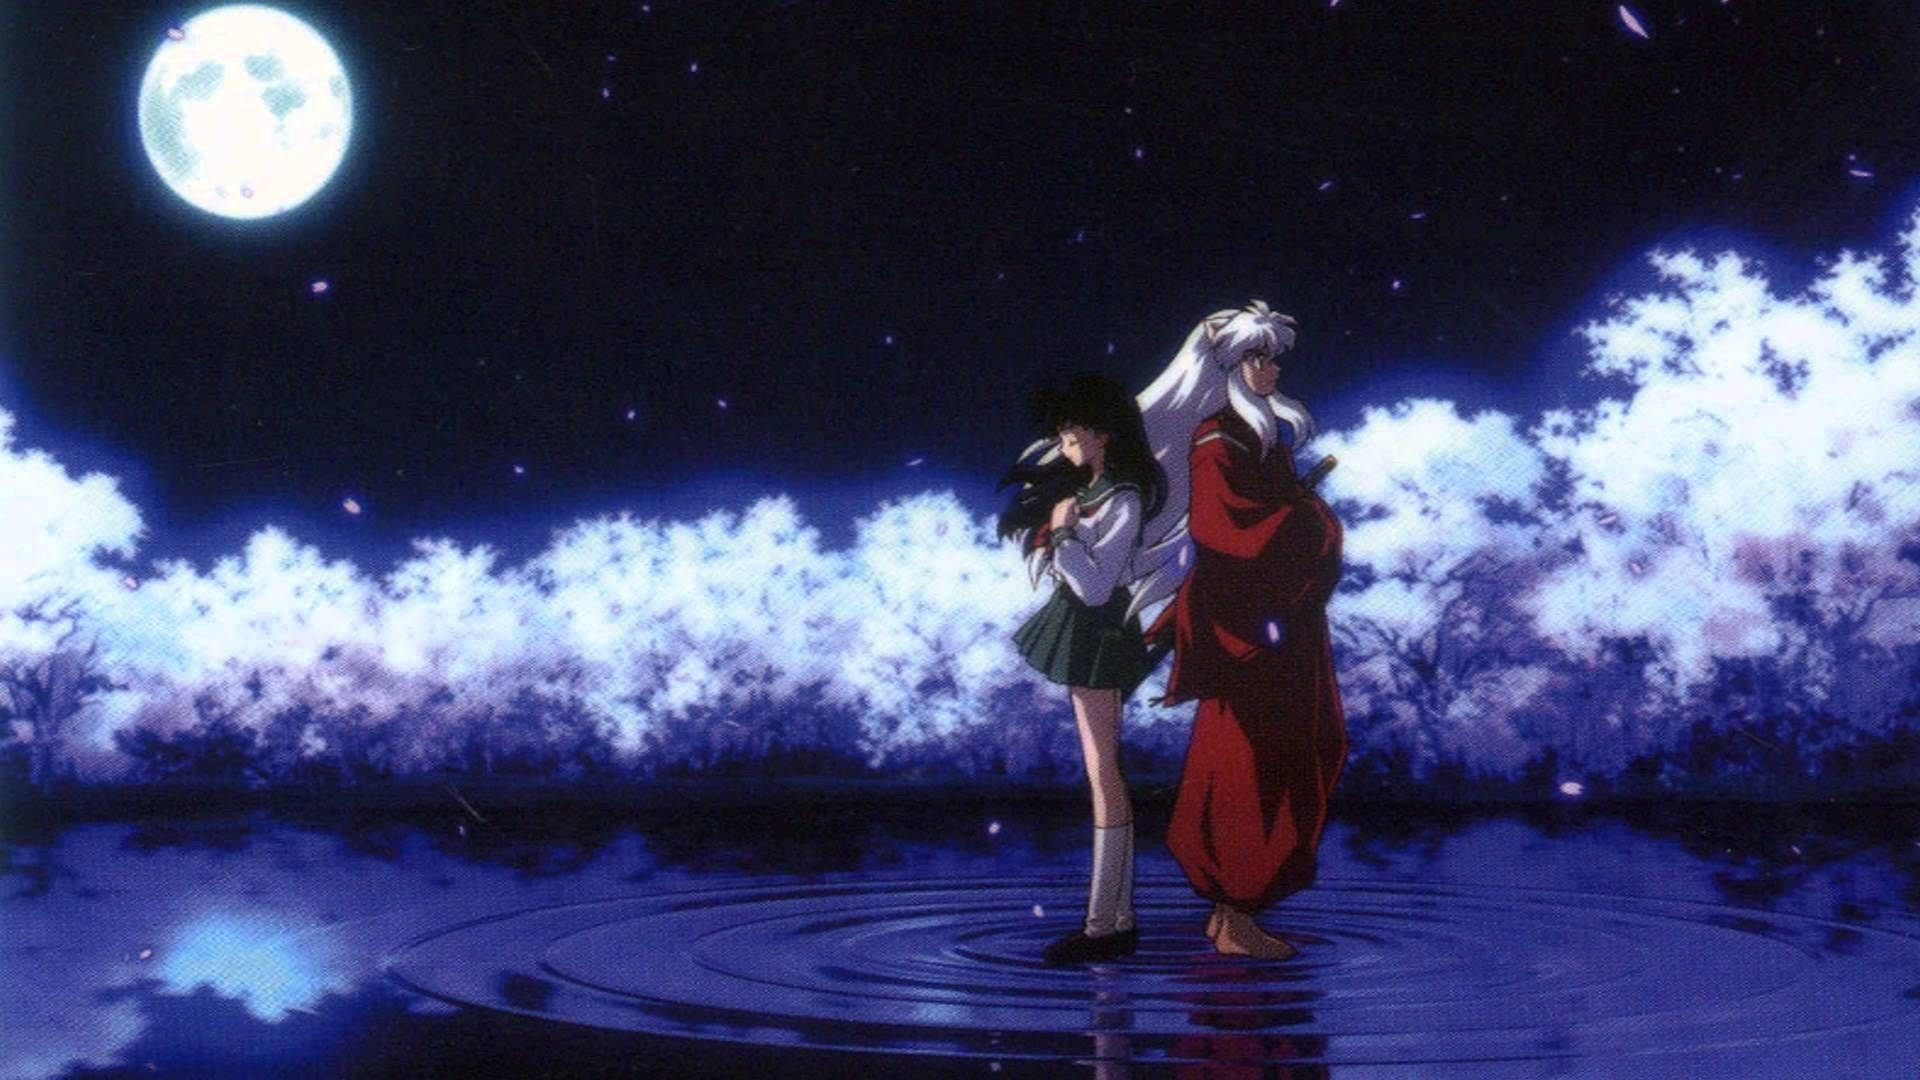 Inuyasha 1920X1080 Wallpaper and Background Image